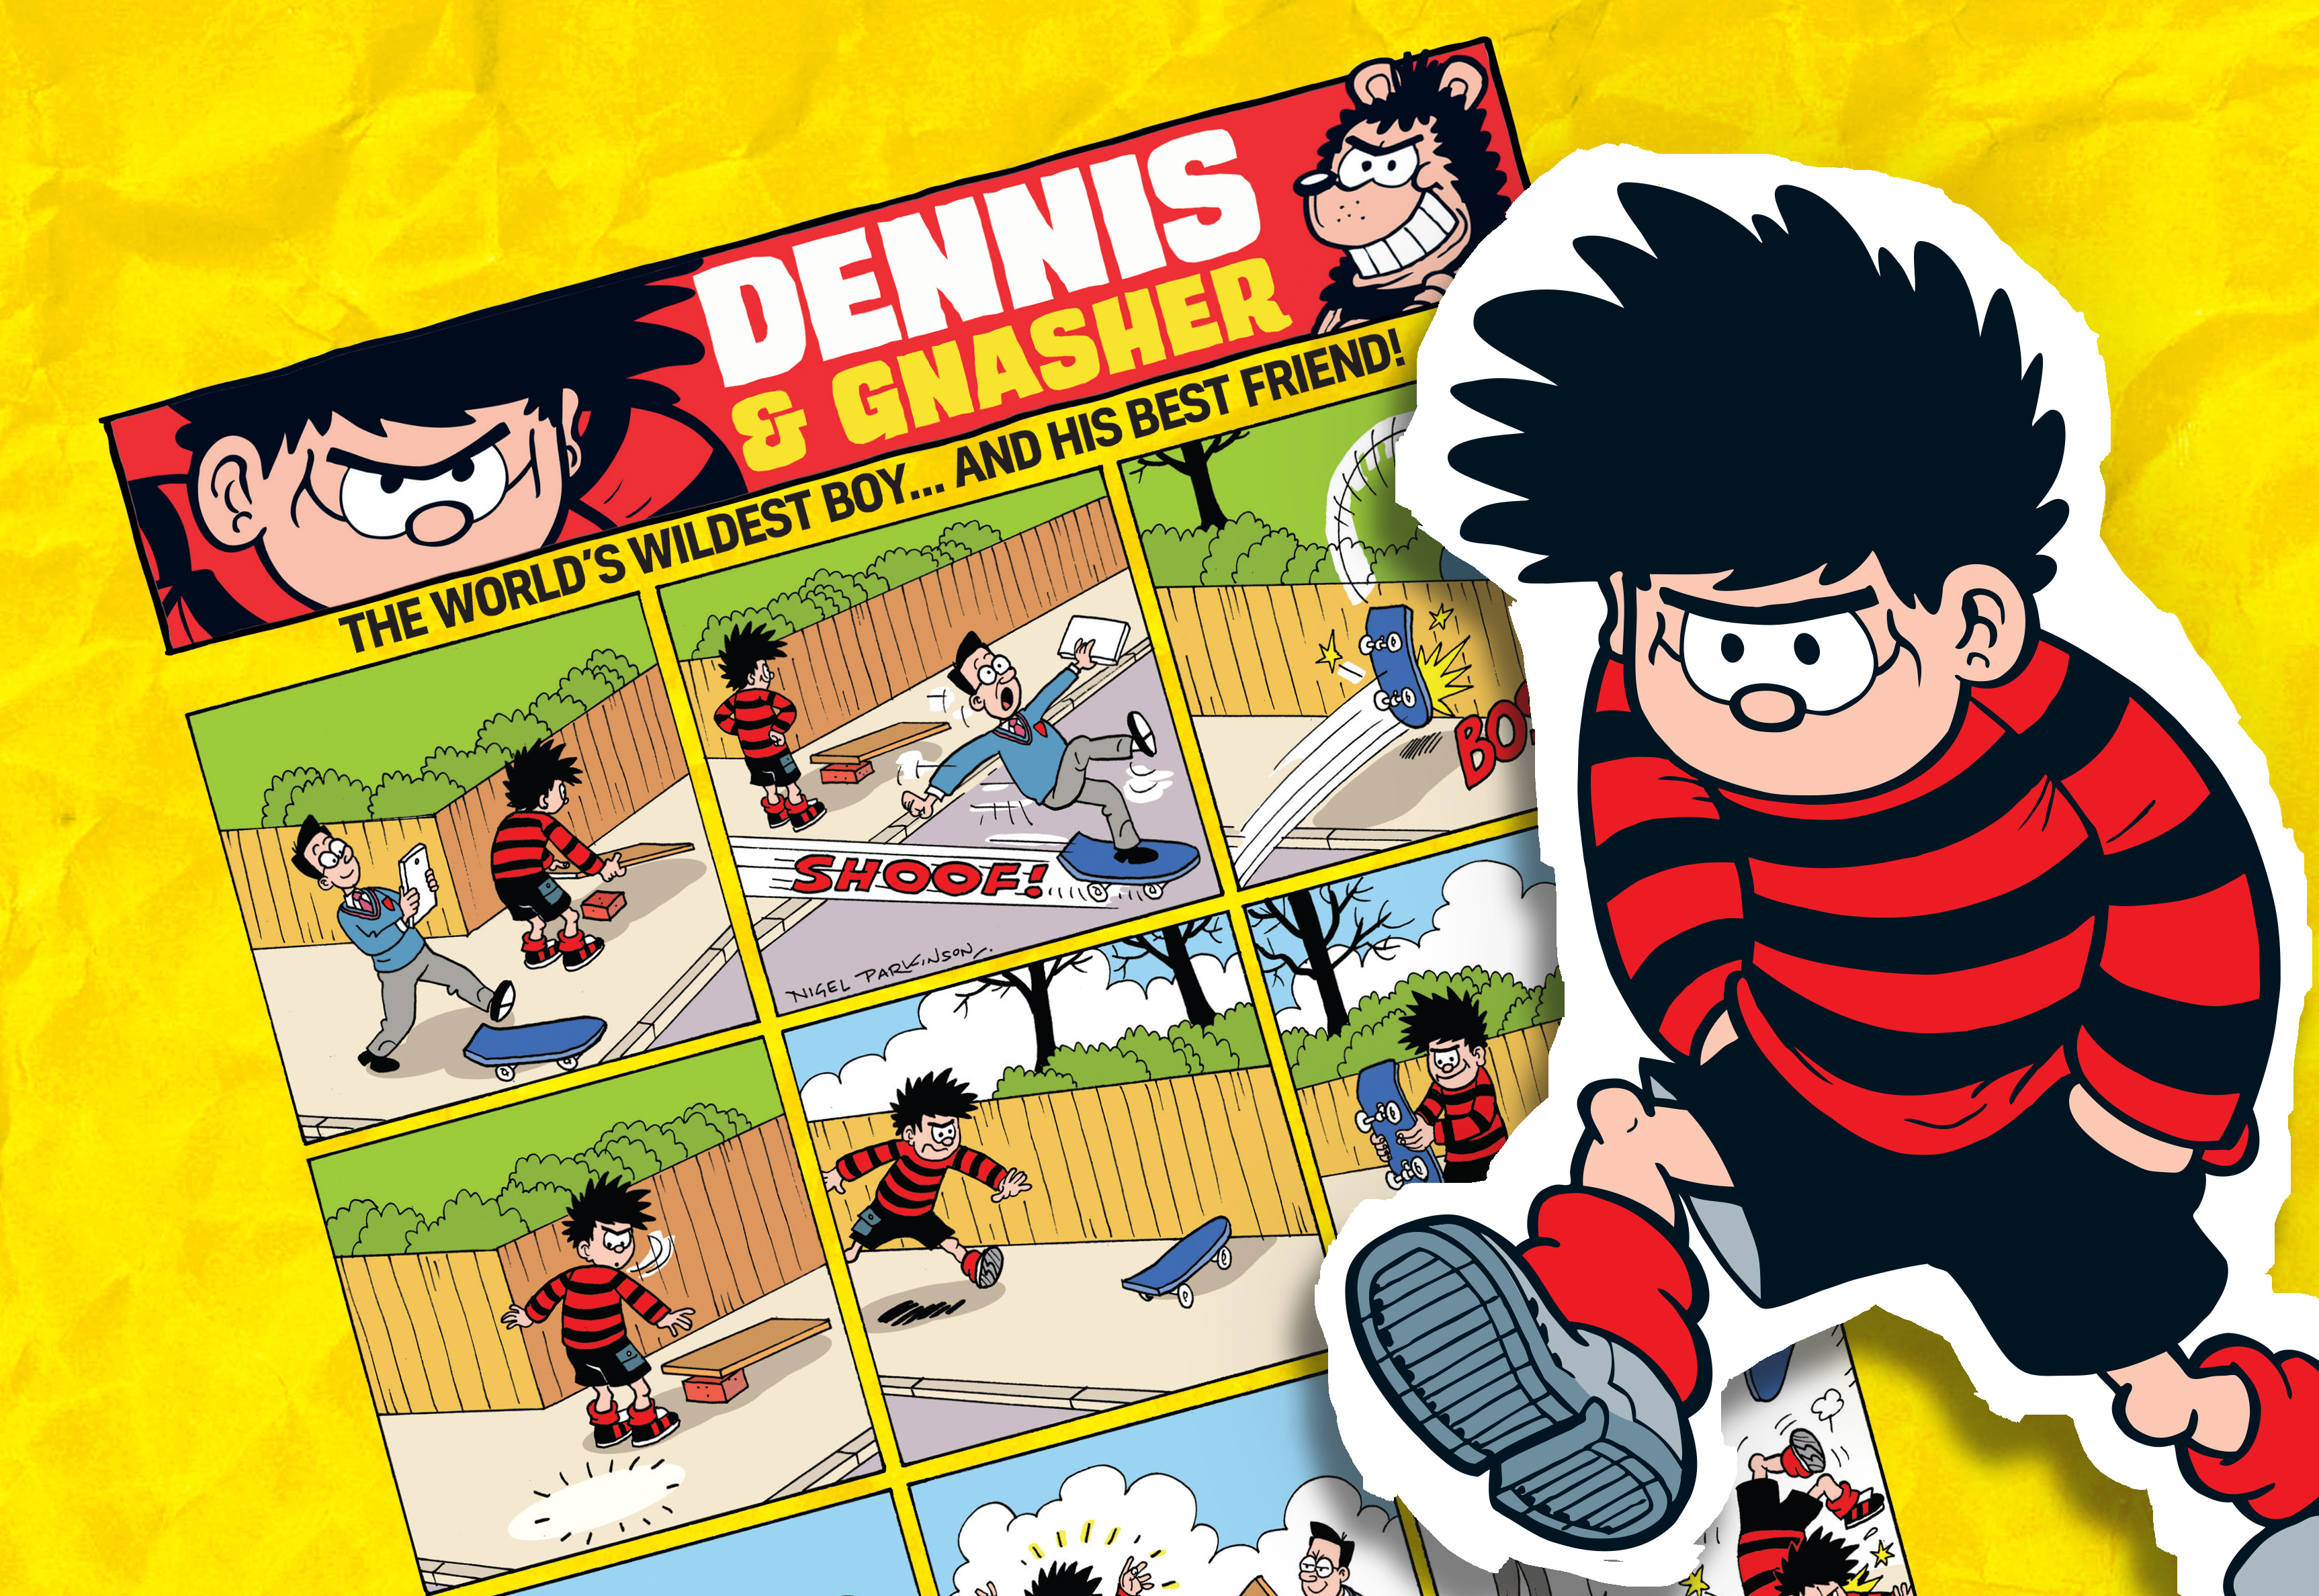 Dennis and Gnasher have a quiet day